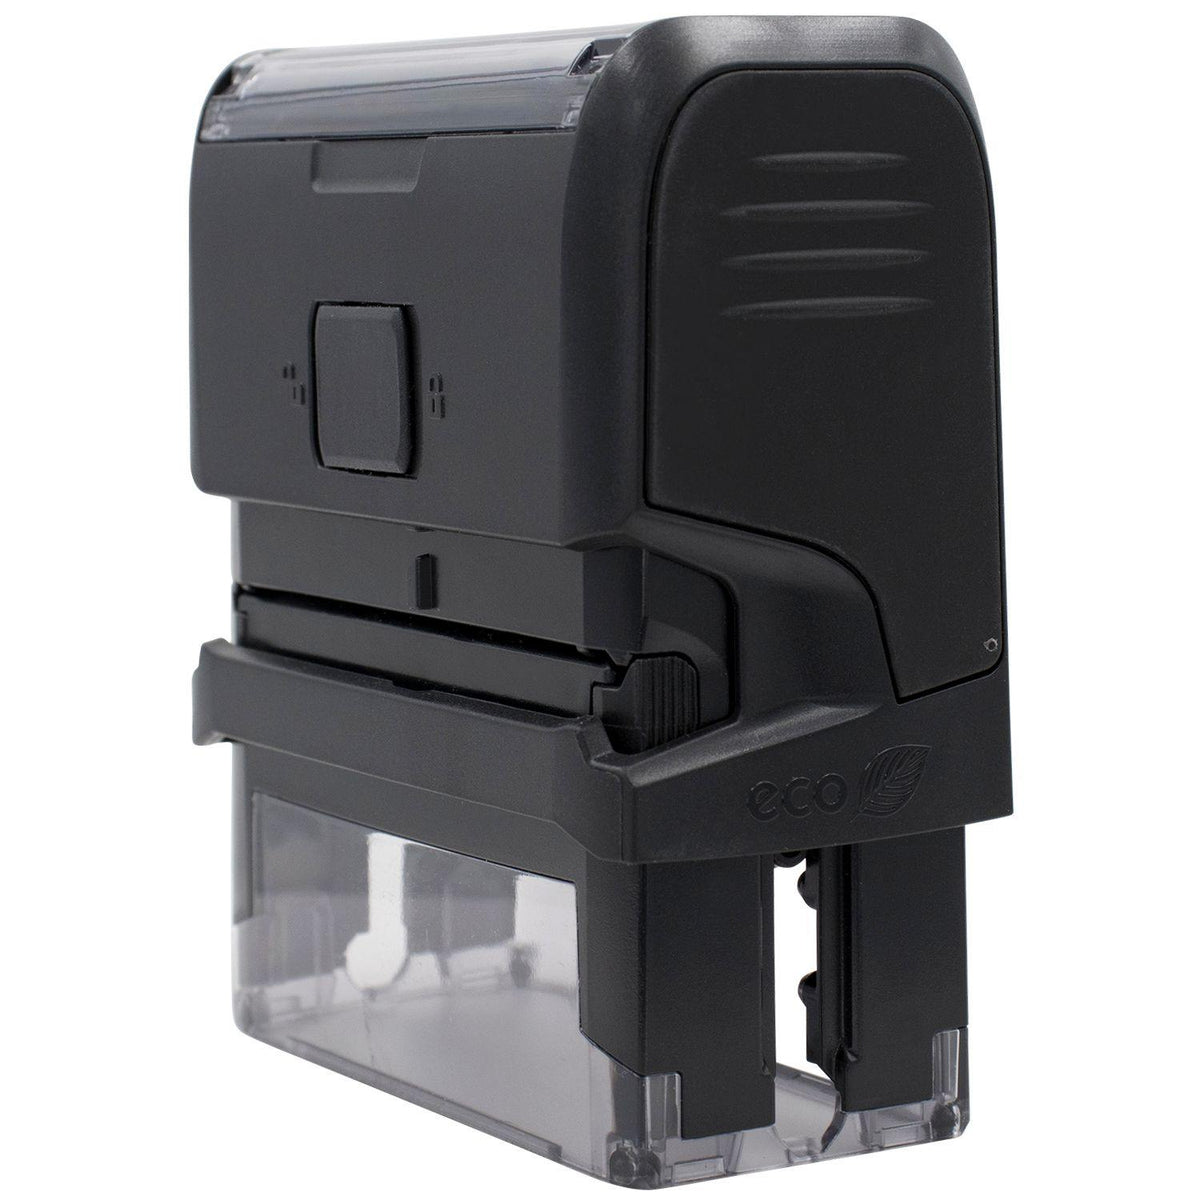 Large Self-Inking Received Unsealed Stamp - Engineer Seal Stamps - Brand_Trodat, Impression Size_Large, Stamp Type_Self-Inking Stamp, Type of Use_Postal &amp; Mailing, Type of Use_Shipping &amp; Receiving